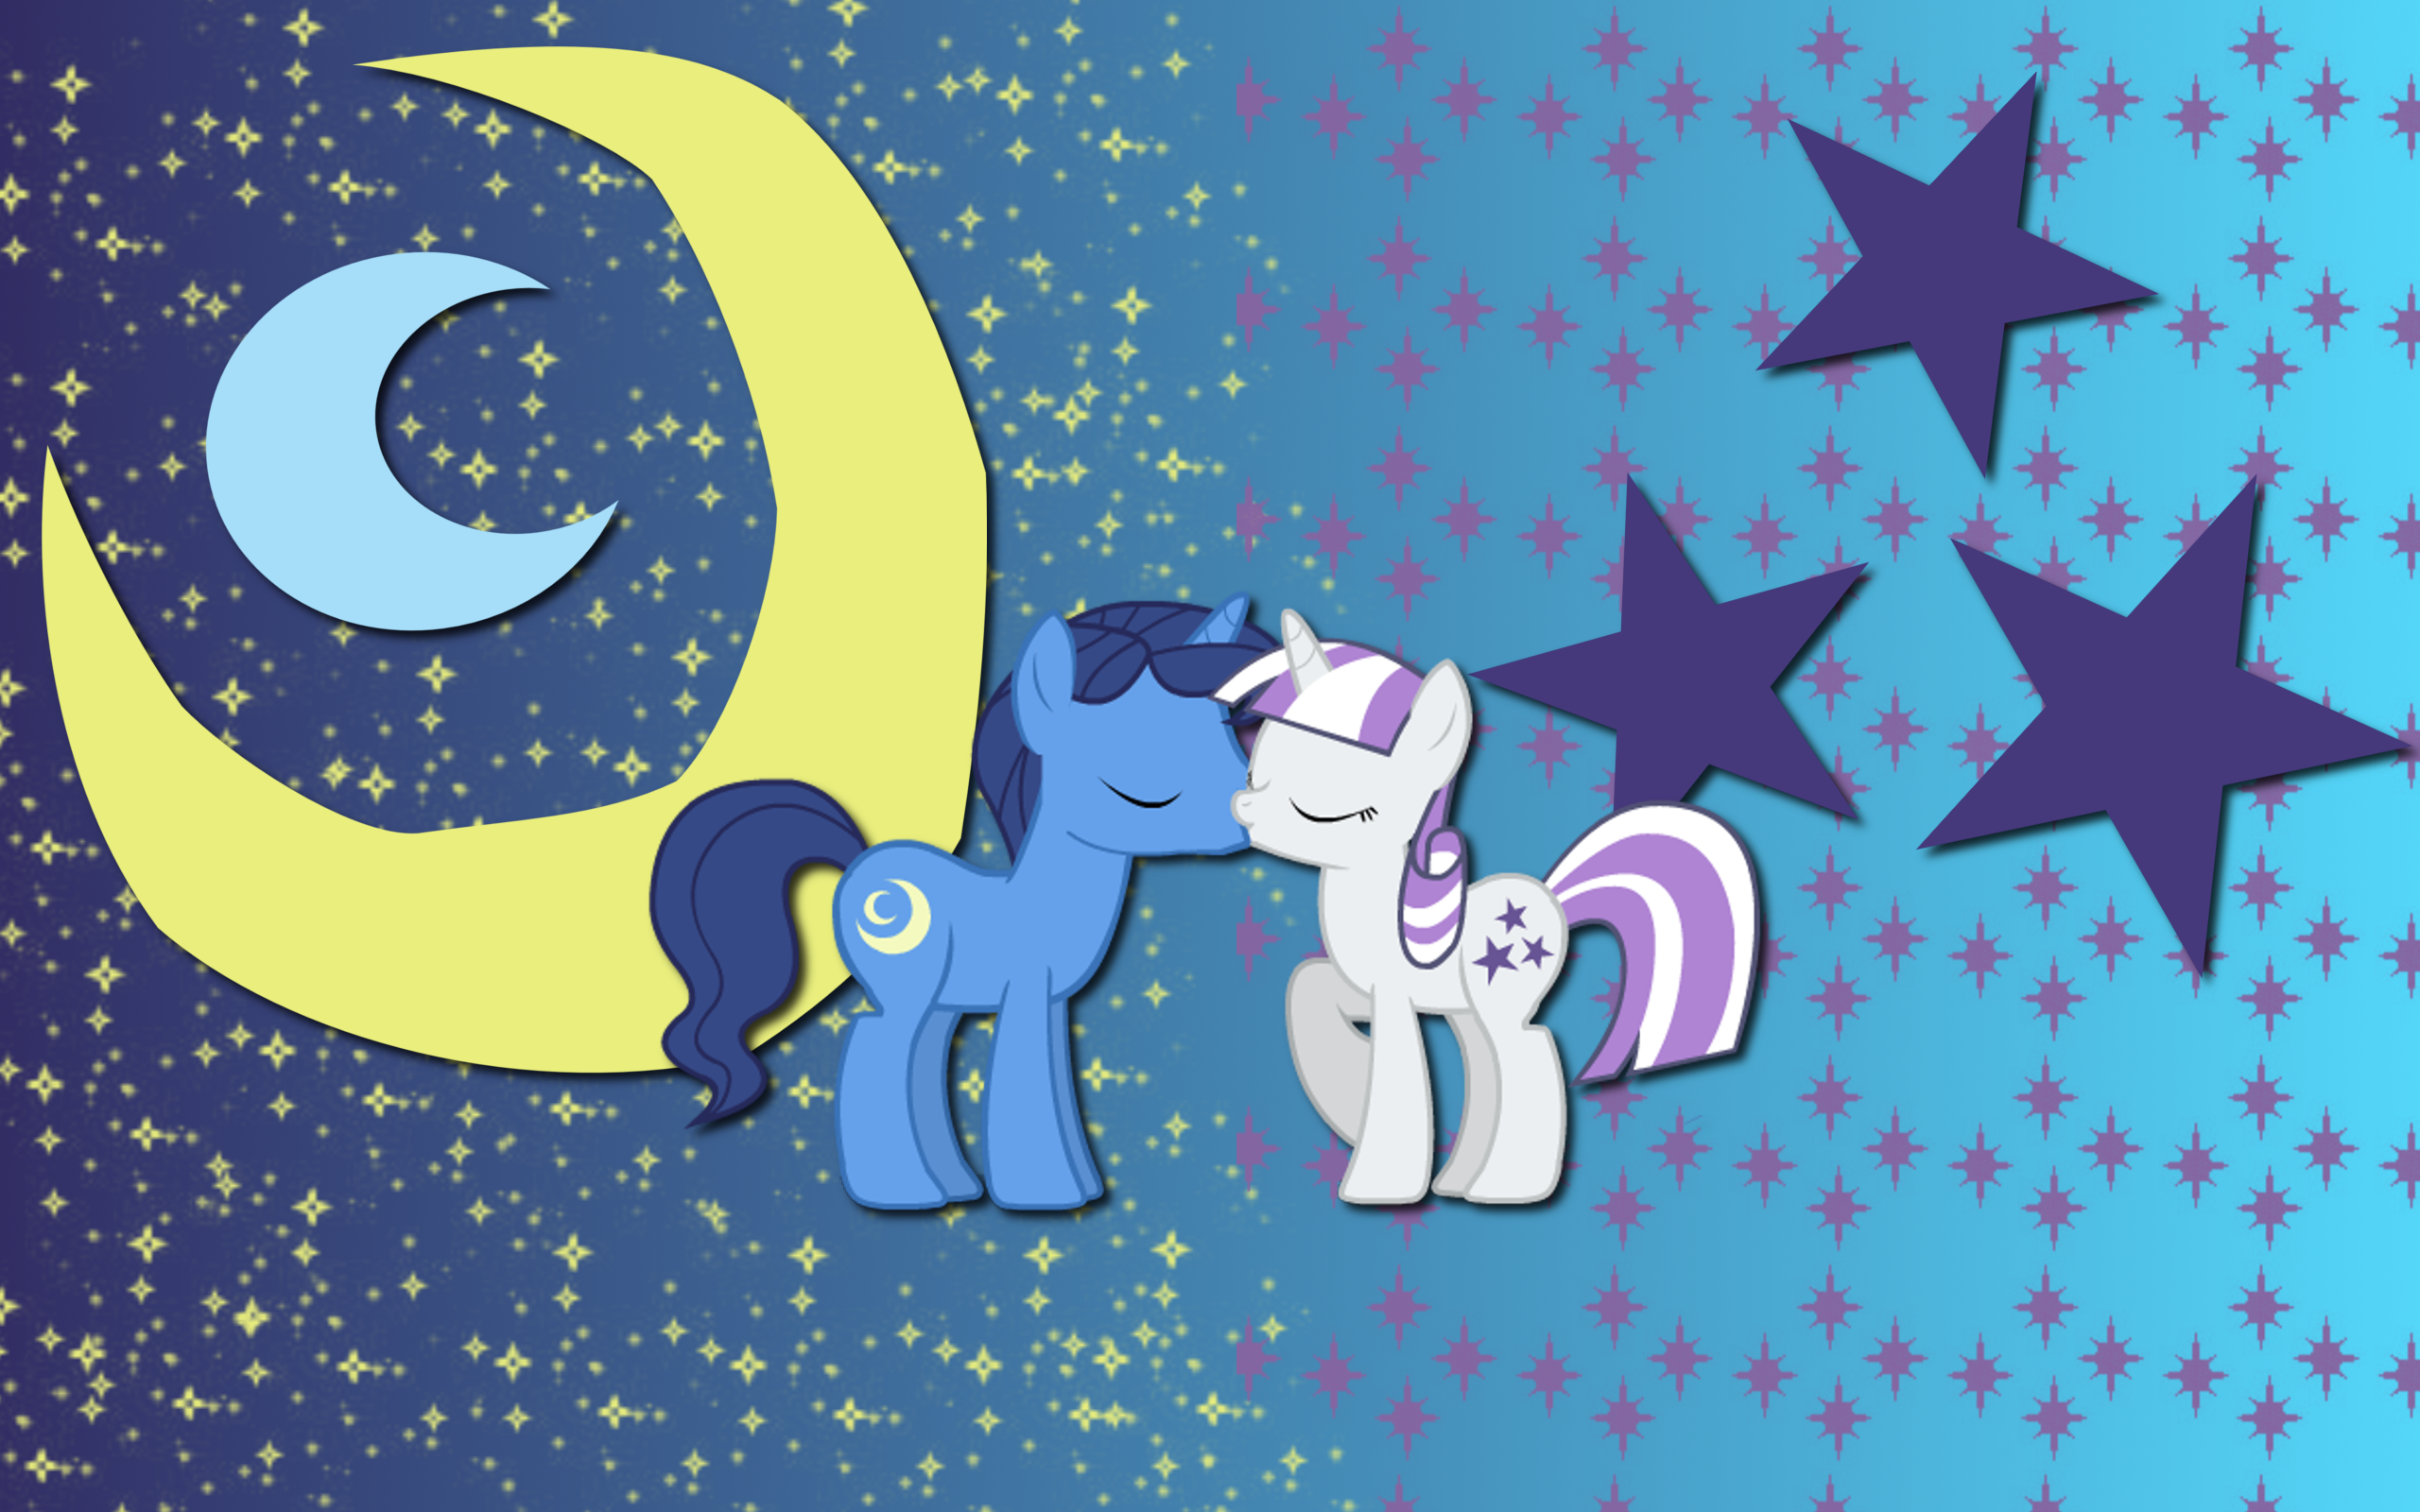 Crescent Star wallpaper by AliceHumanSacrifice0, Mixermike622 and The-Smiling-Pony